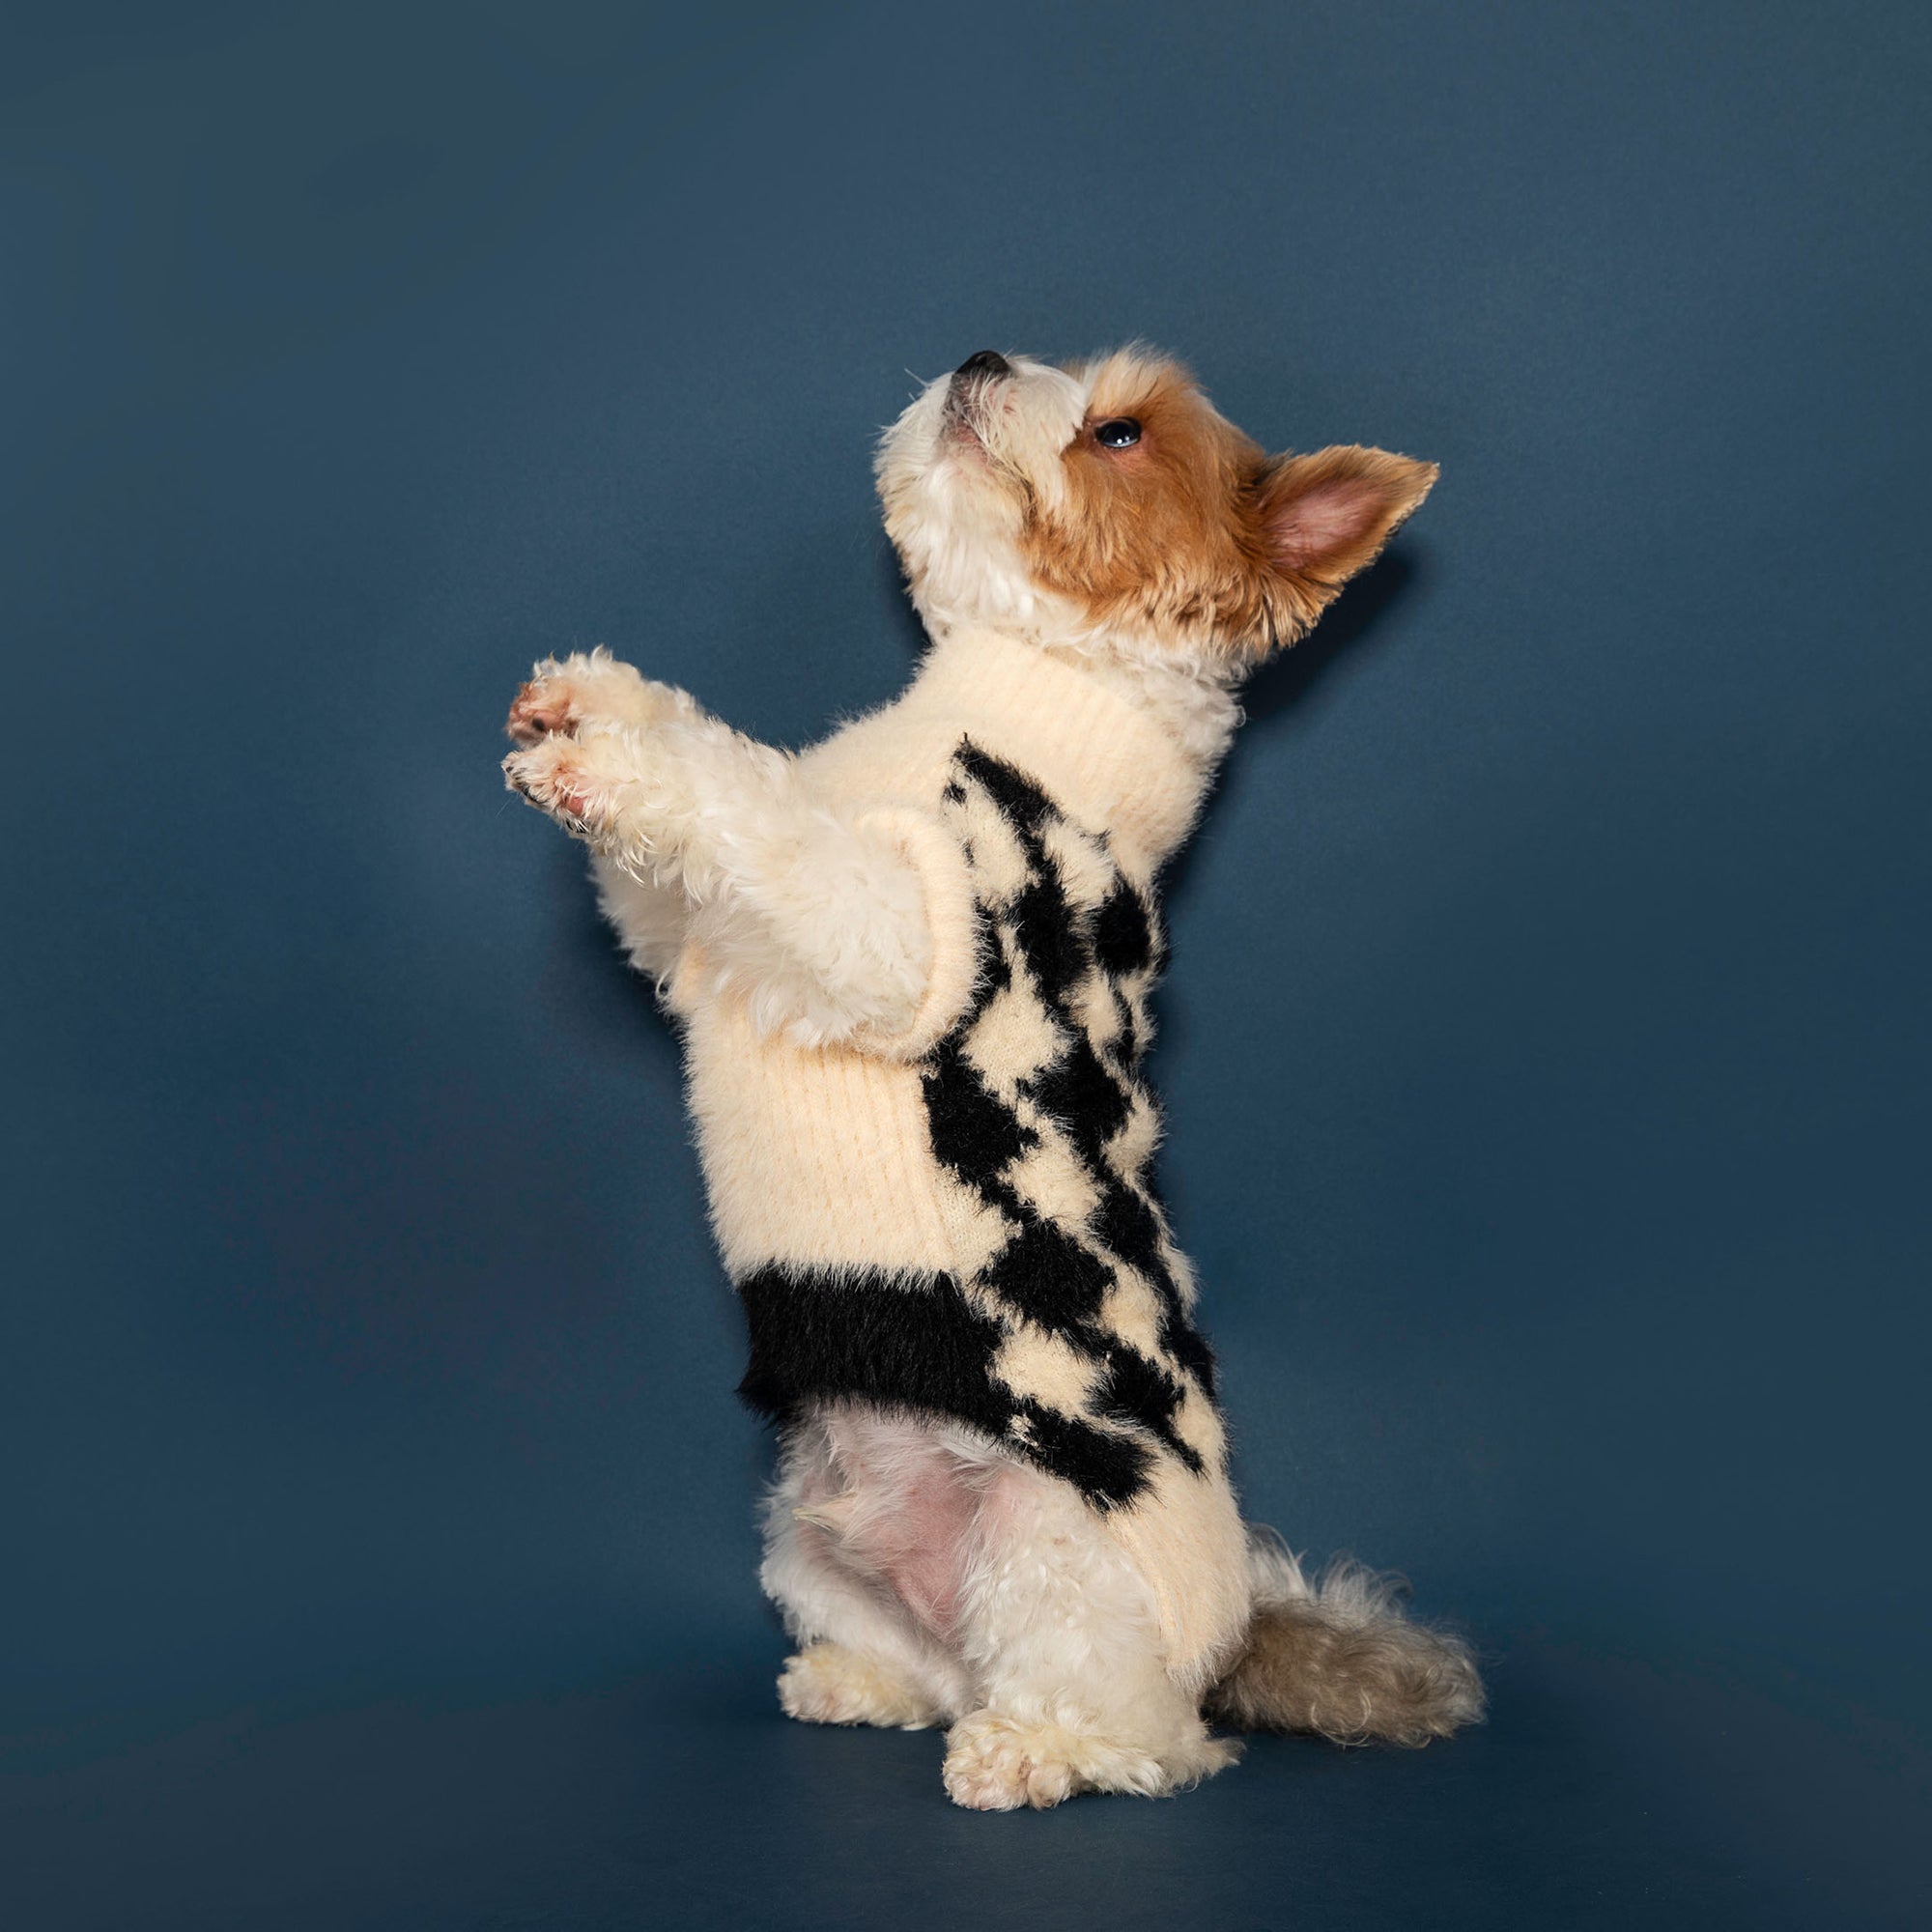 A Yorkshire Terrier mix dog stands on its hind legs, clad in a cozy beige sweater with a black houndstooth pattern, against a dark blue background.